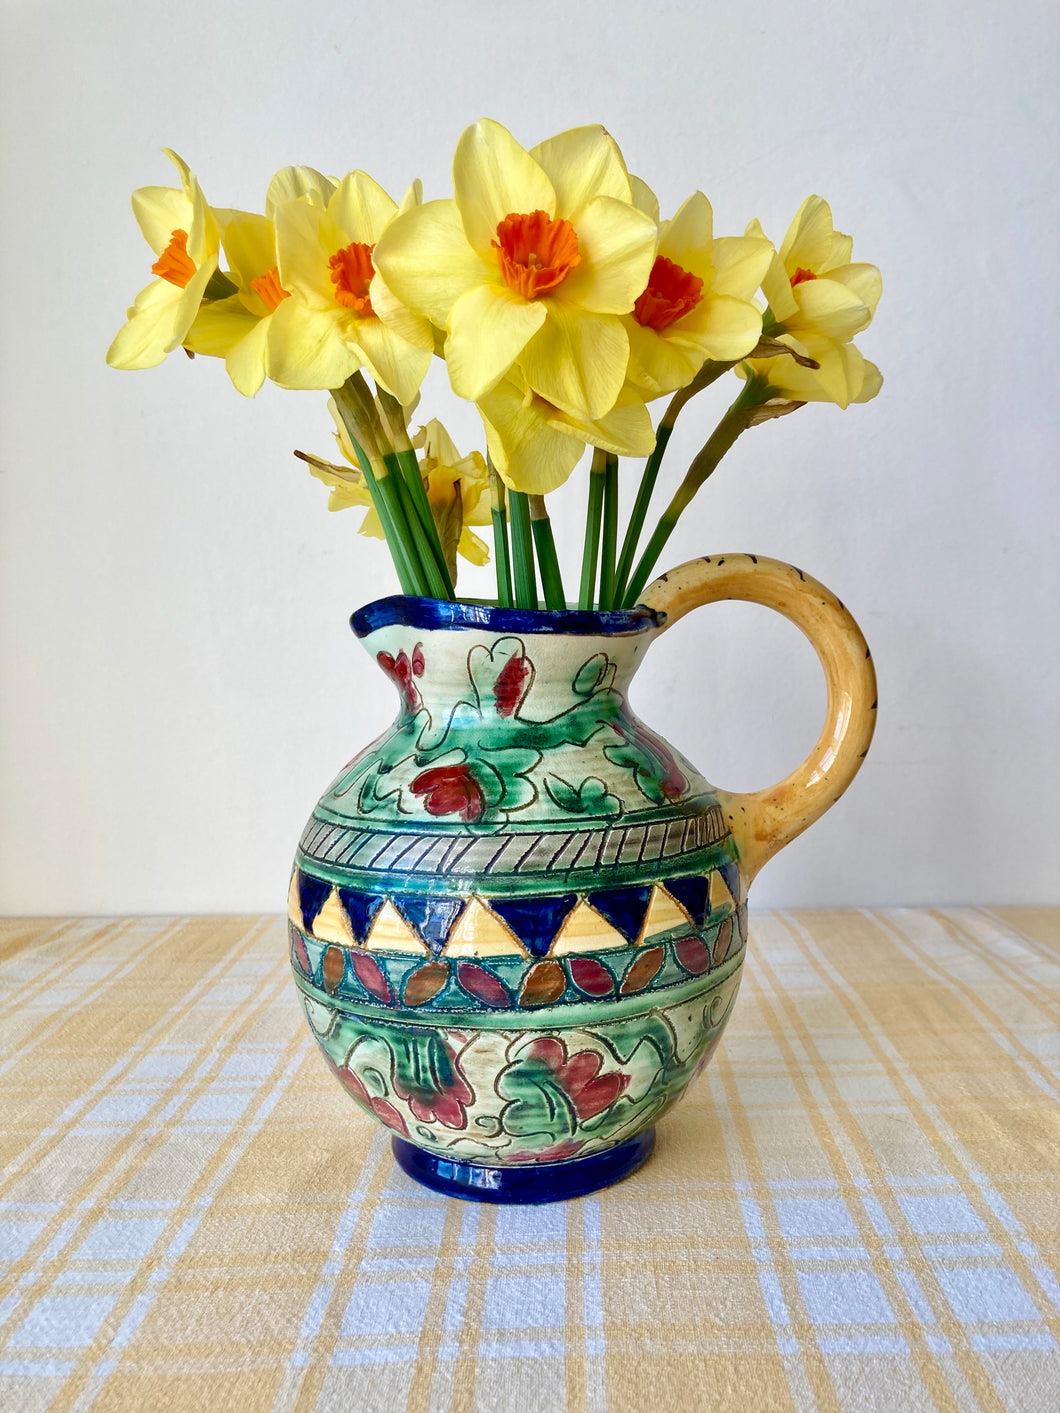 Antique hand thrown and decorated jug